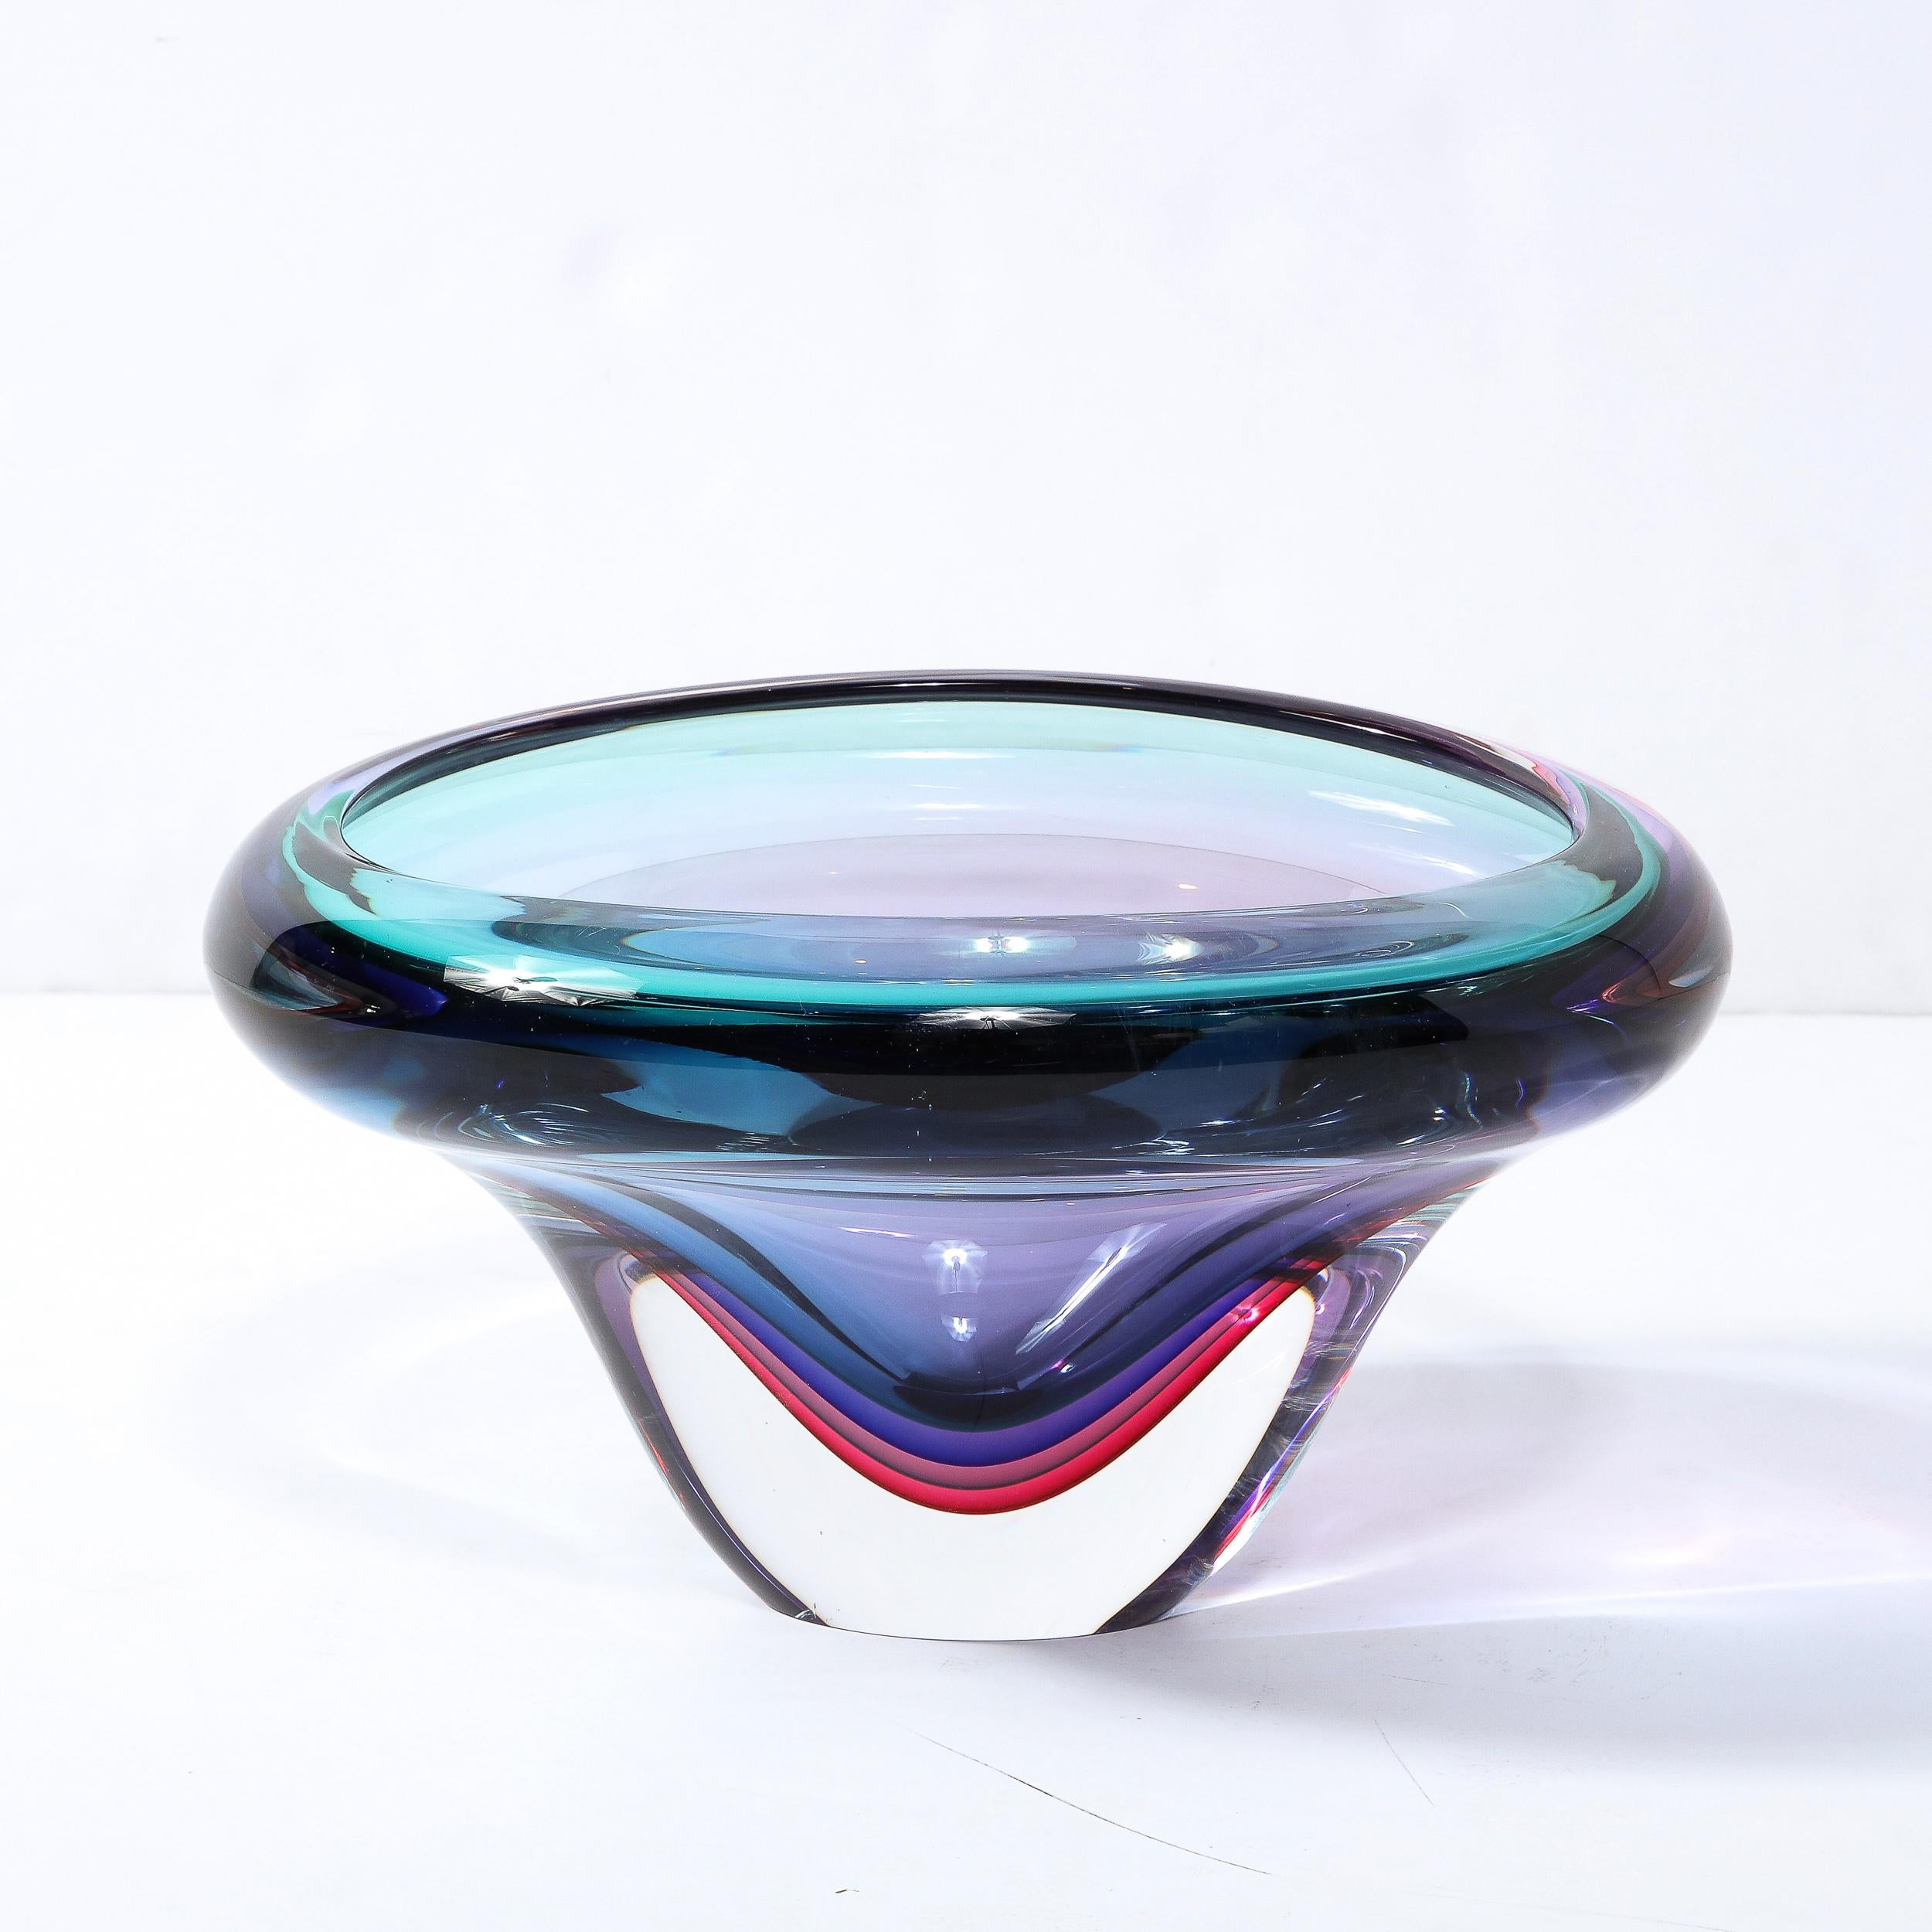 This stunning modernist glass bowl was realized by the esteemed studio of Signoretti in Murano, Italy- the island off the coast of Venice renowned for centuries for its superlative glass production- circa 2010. It features an elliptical form with a